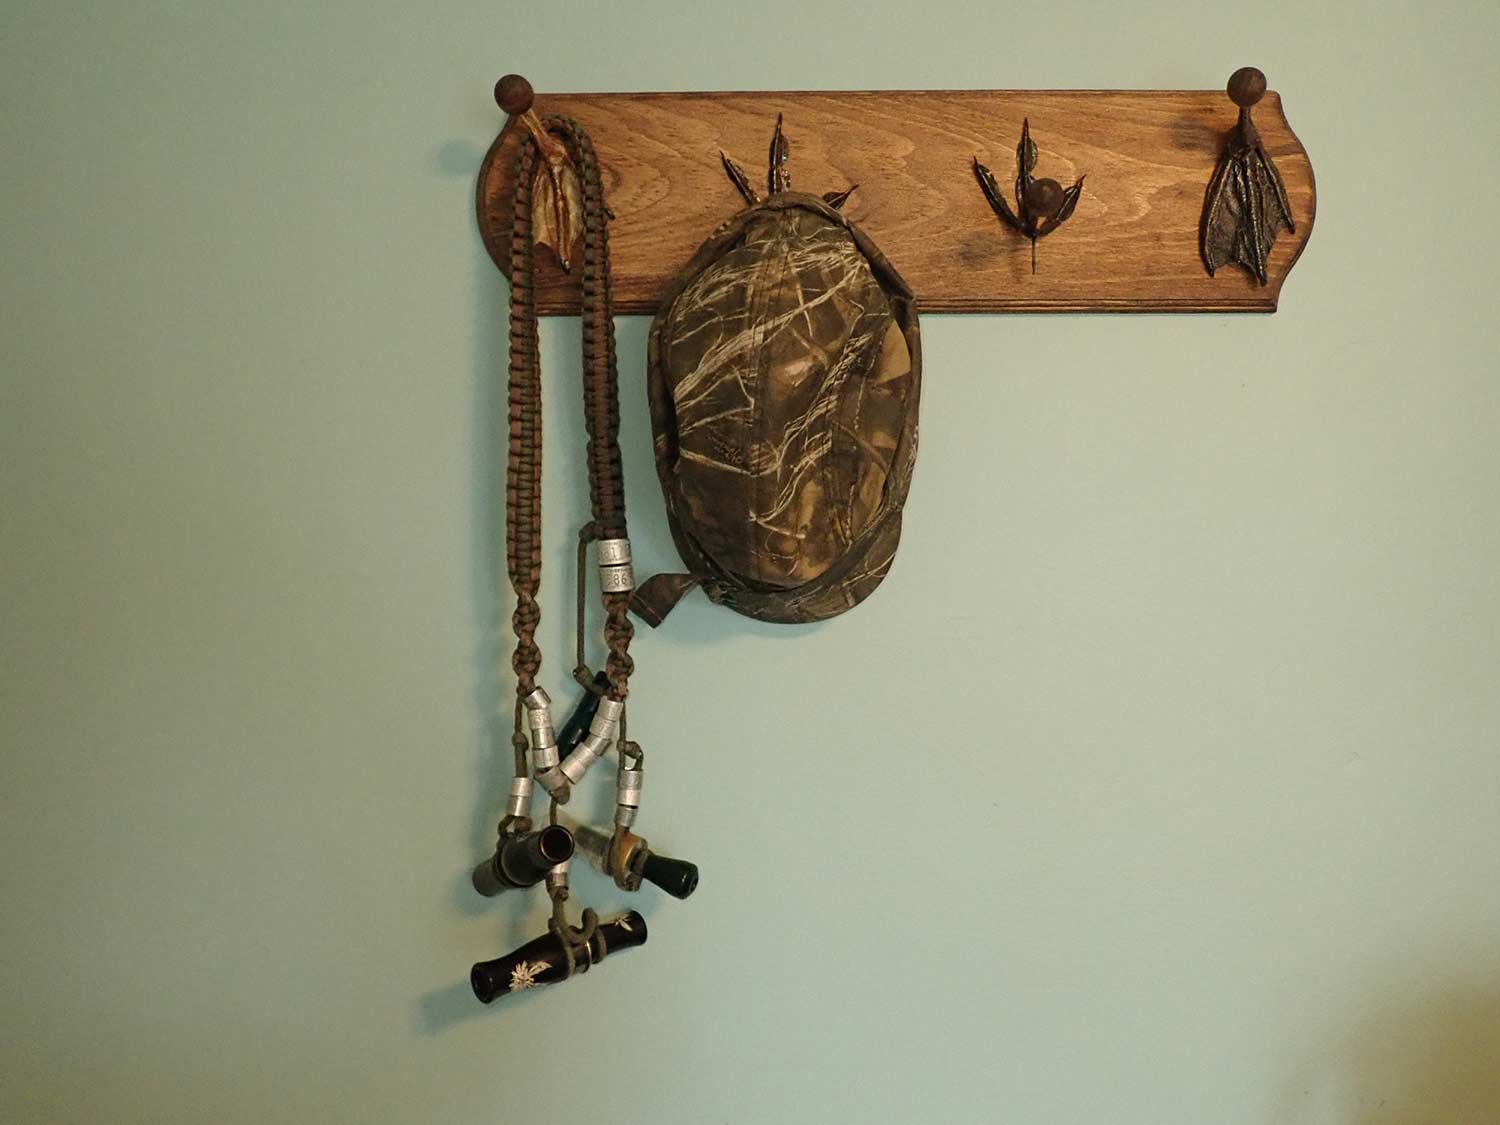 A wall-hanging hat rack made with duck feet.